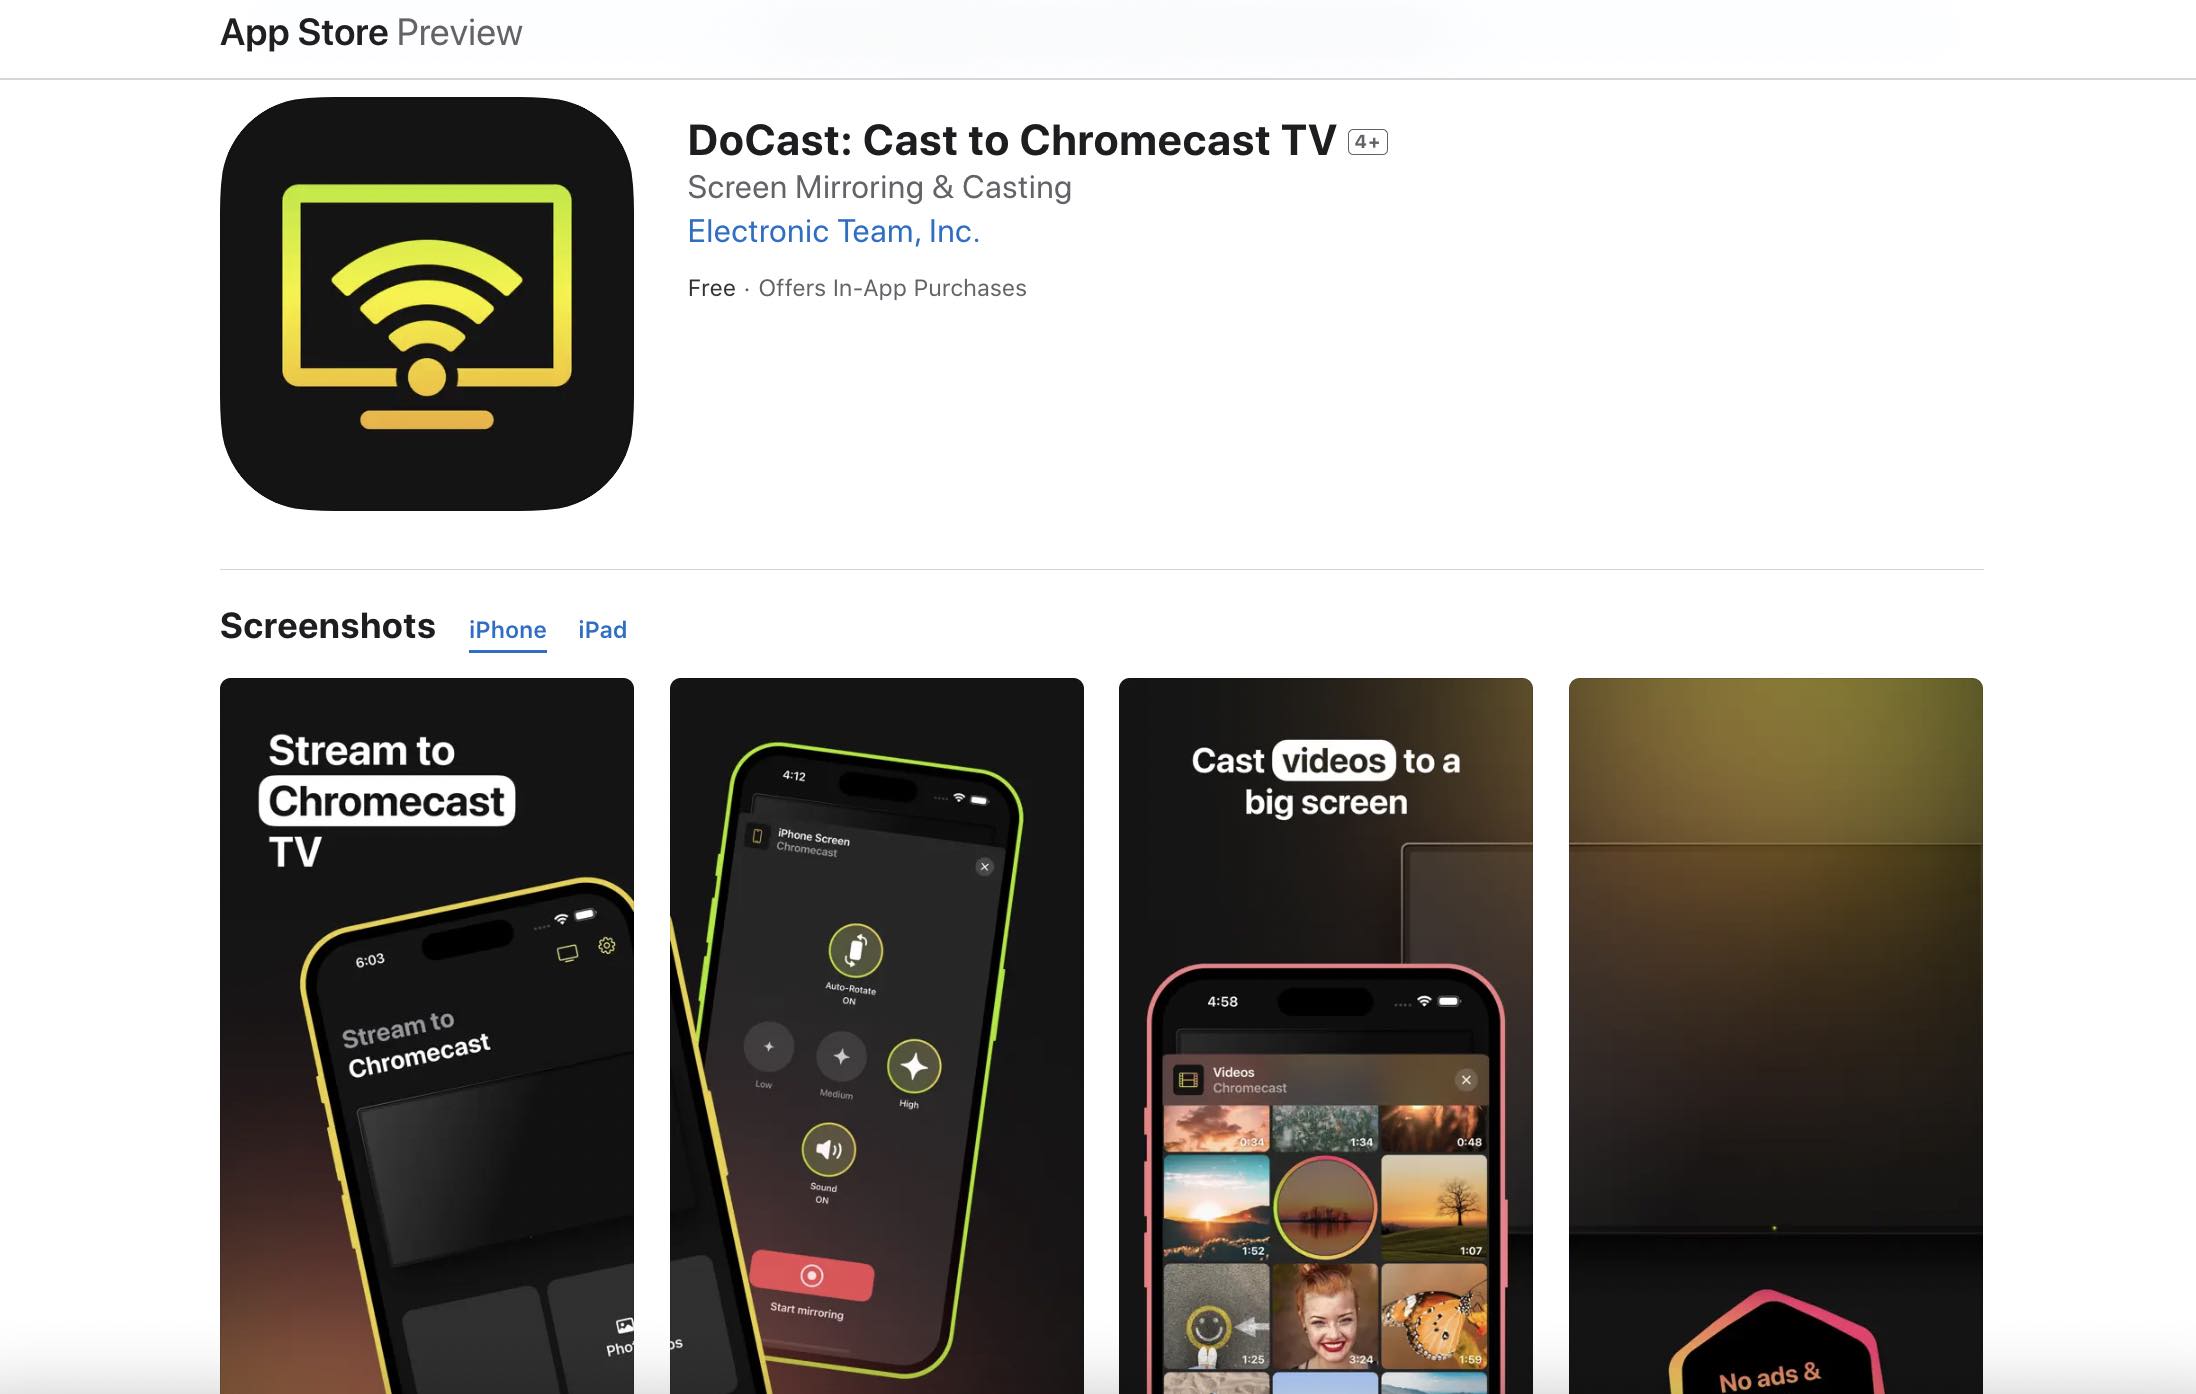 The DoCast app in the App Store